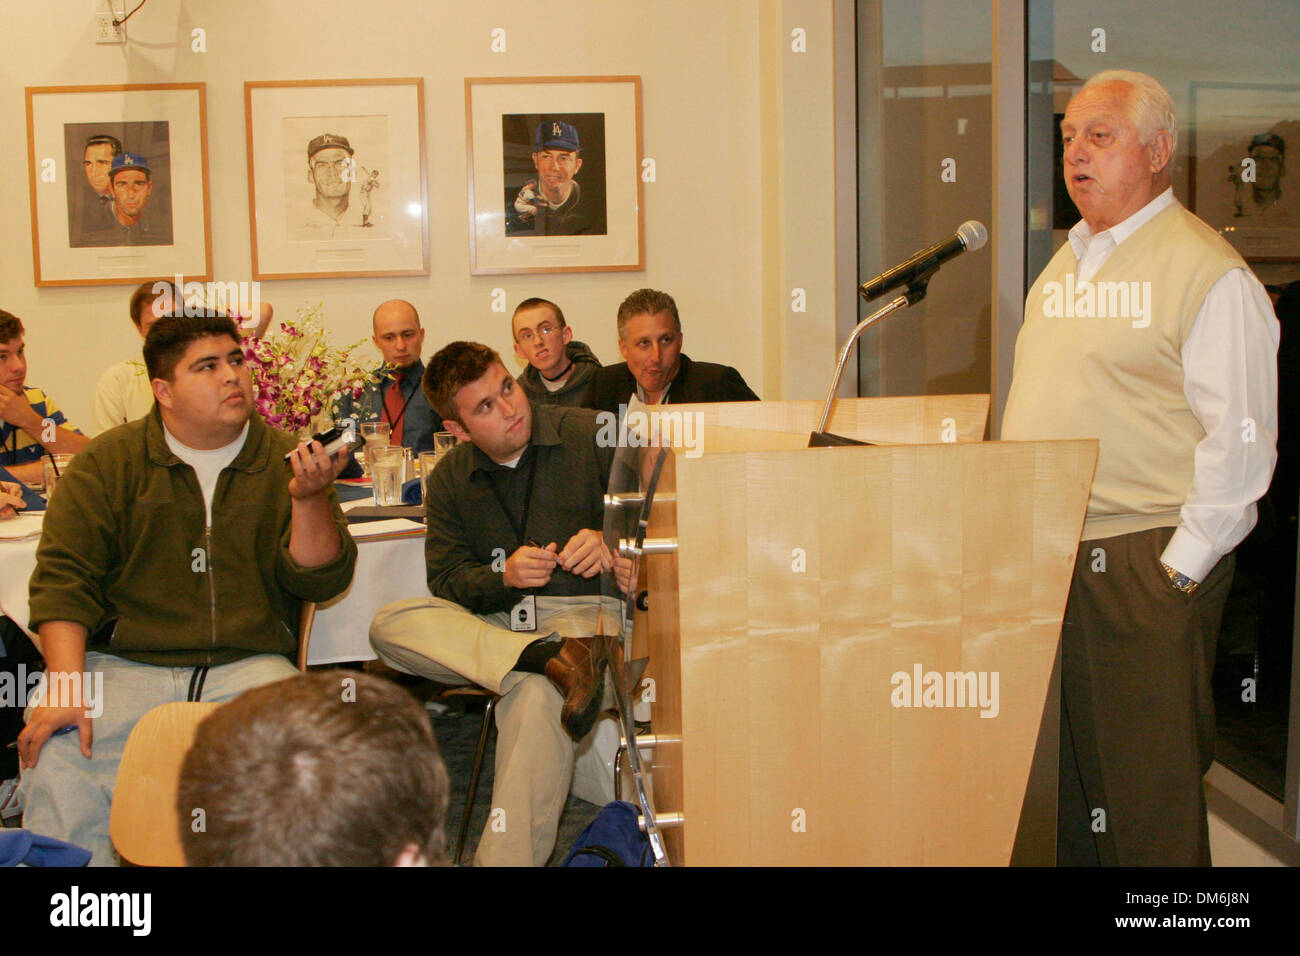 May 12, 2005; Los Angeles, CA, USA; Former Los Angeles Dodgers manager TOMMY LASORDA meets students during a Sports Journalism Workshop at the Los Angeles Dodgers Stadium. Mandatory Credit: Photo by Ringo H.W. Chiu/ZUMA Press. (©) Copyright 2005 by Ringo H.W. Chiu Stock Photo